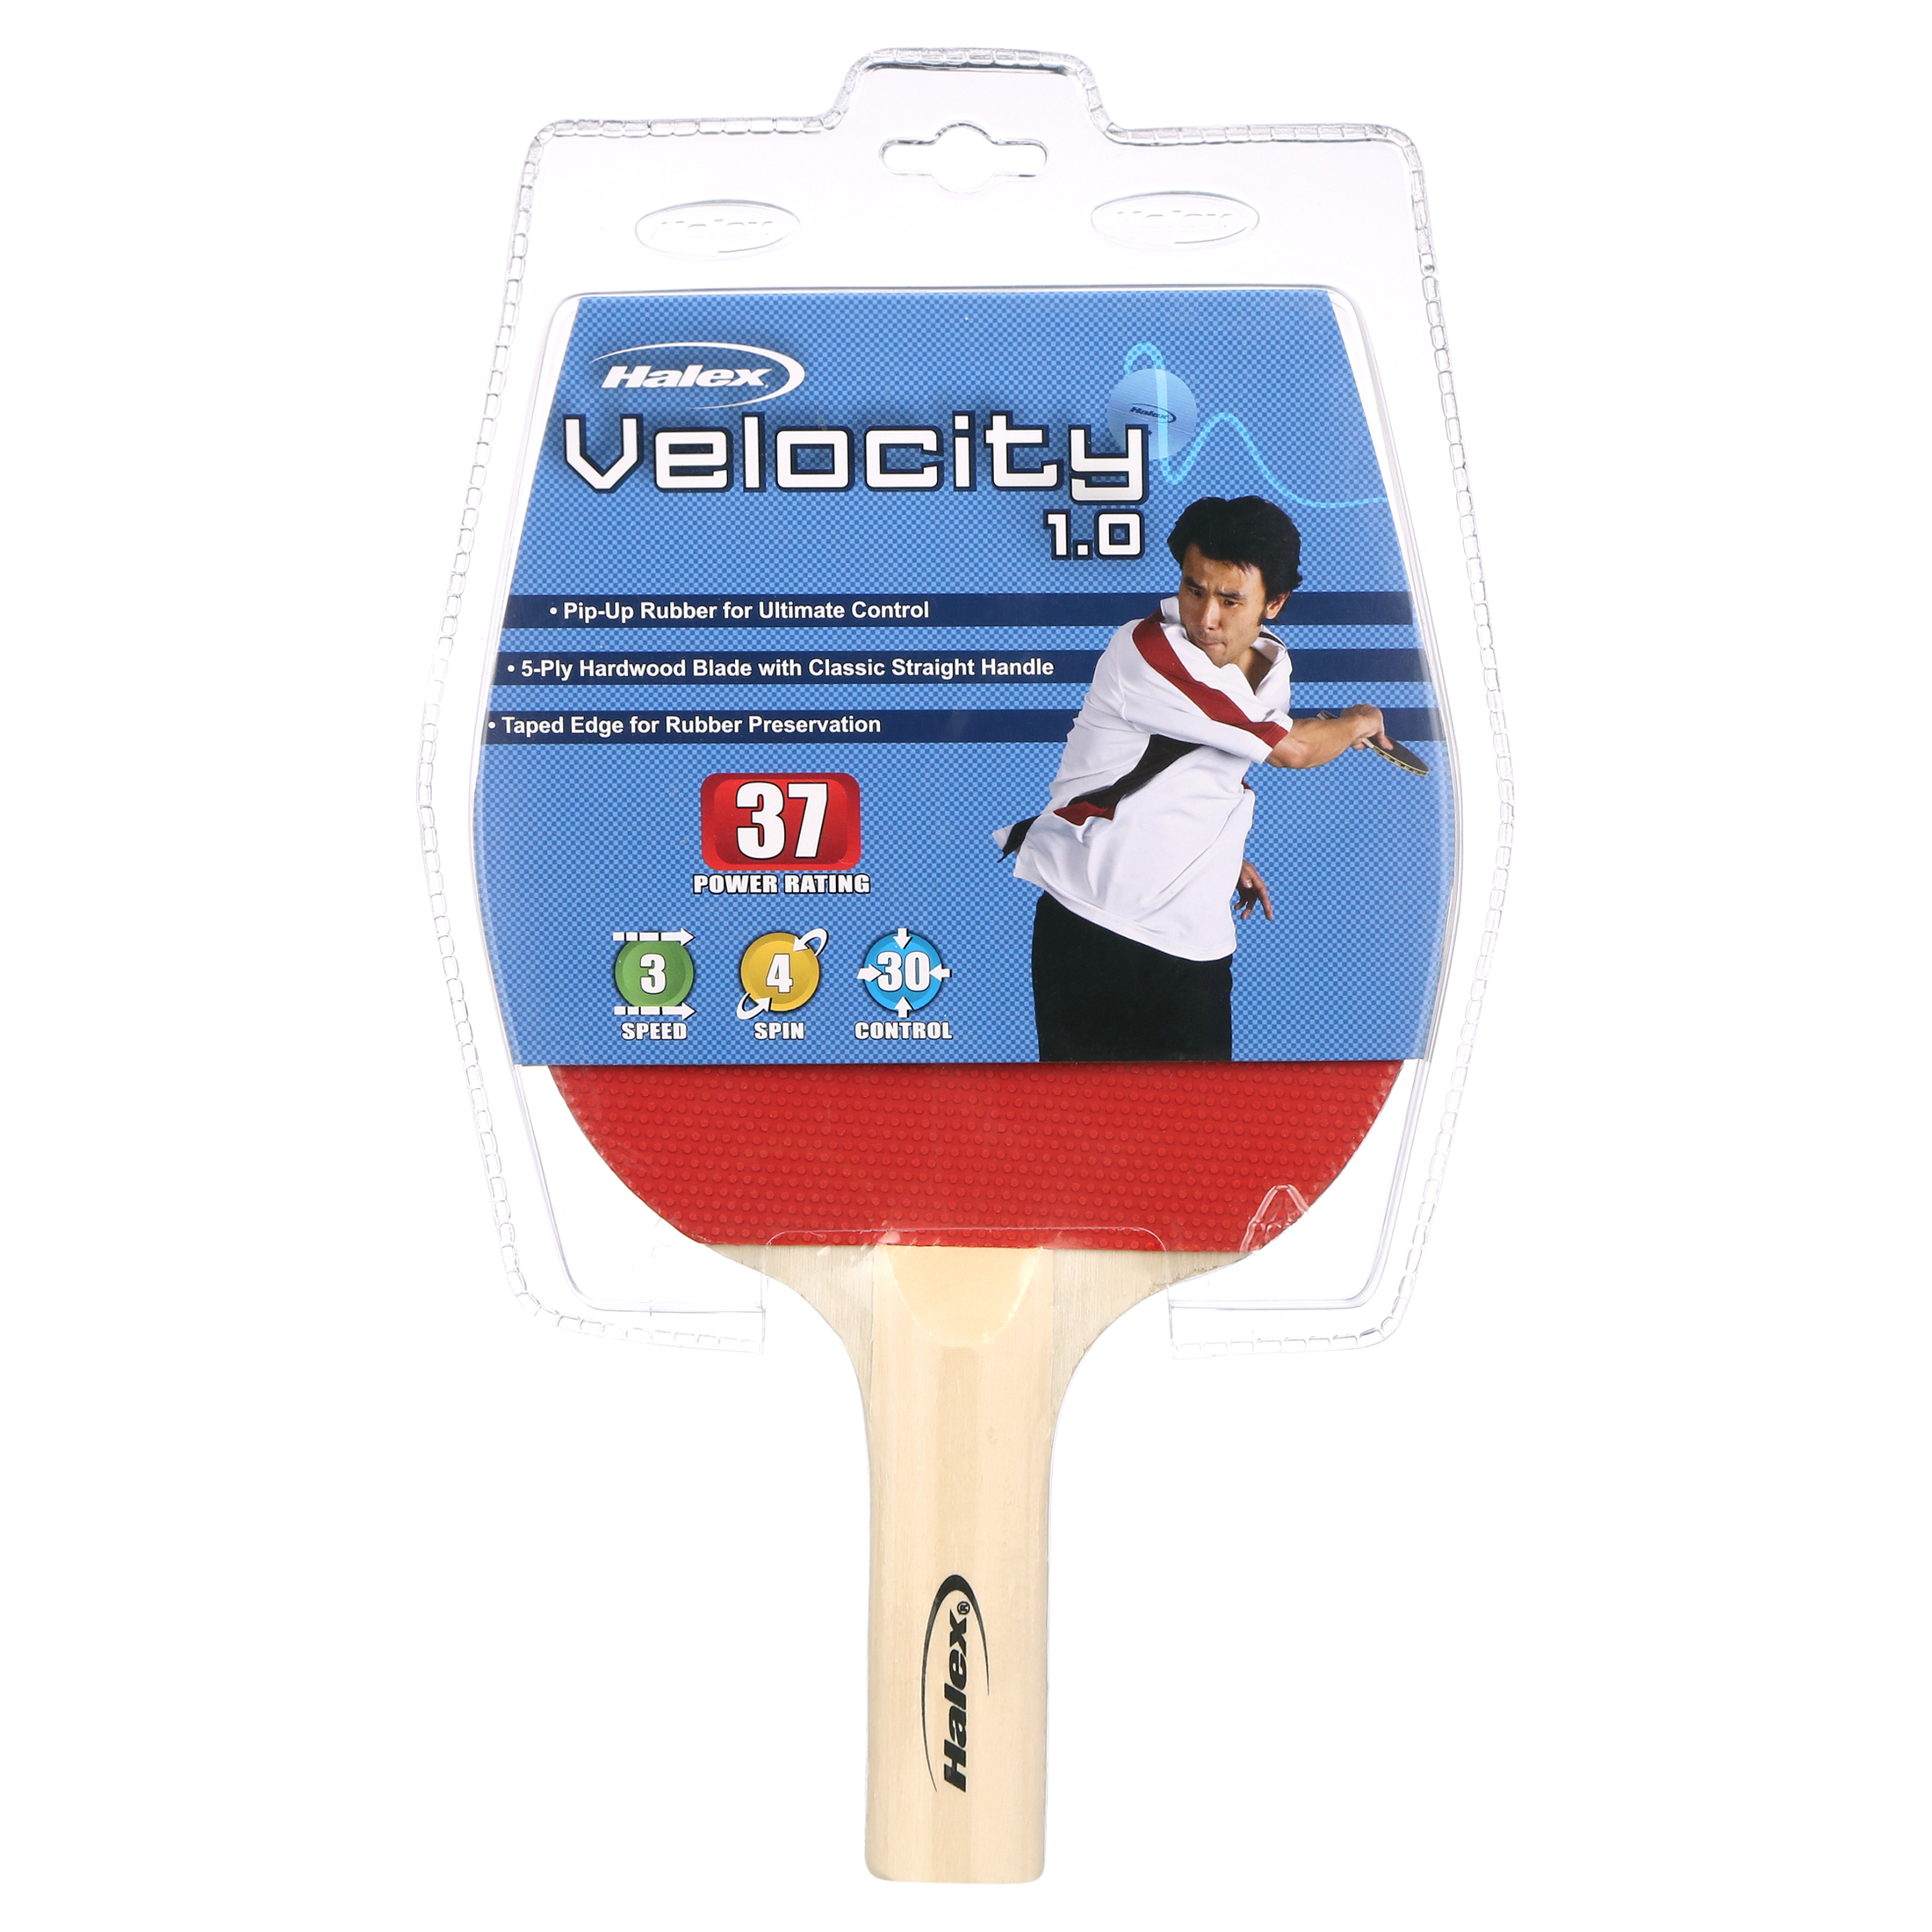 Halex Velocity Table Tennis Paddle, One Paddle, Wooden Handle - image 2 of 6